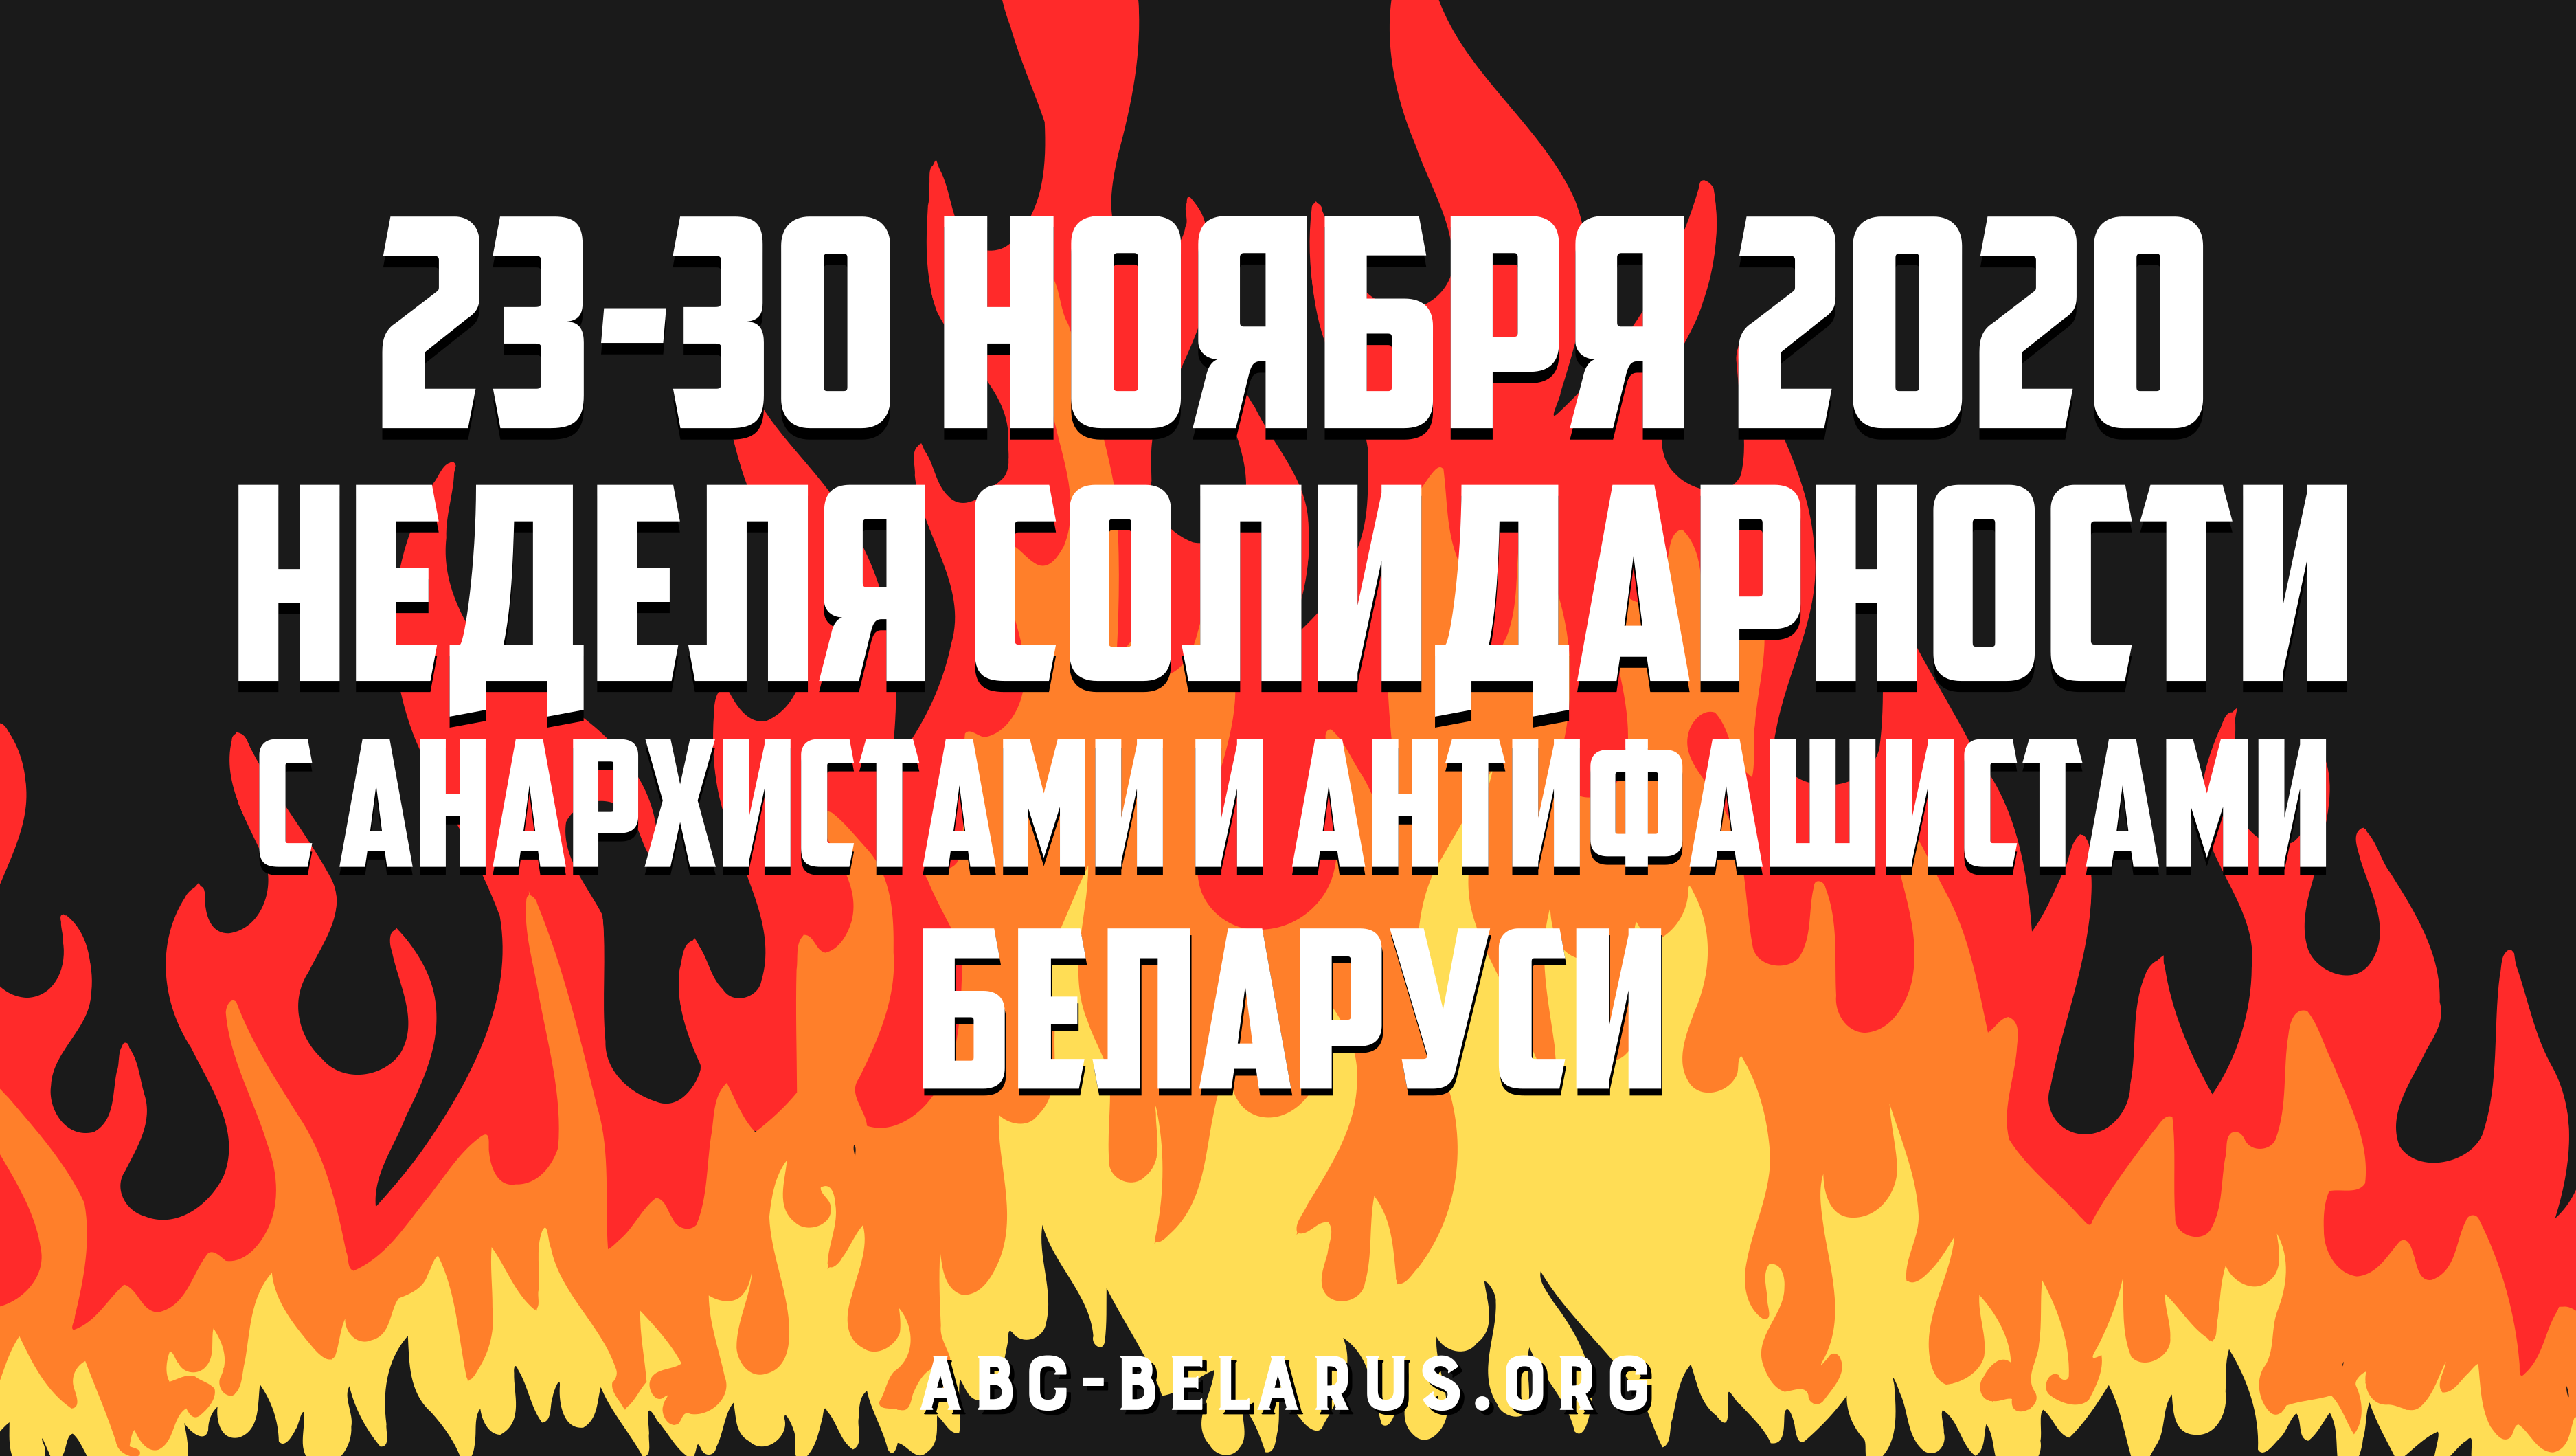 Call for a week of solidarity with anarchists and antifascists of Belarus 23-30 November